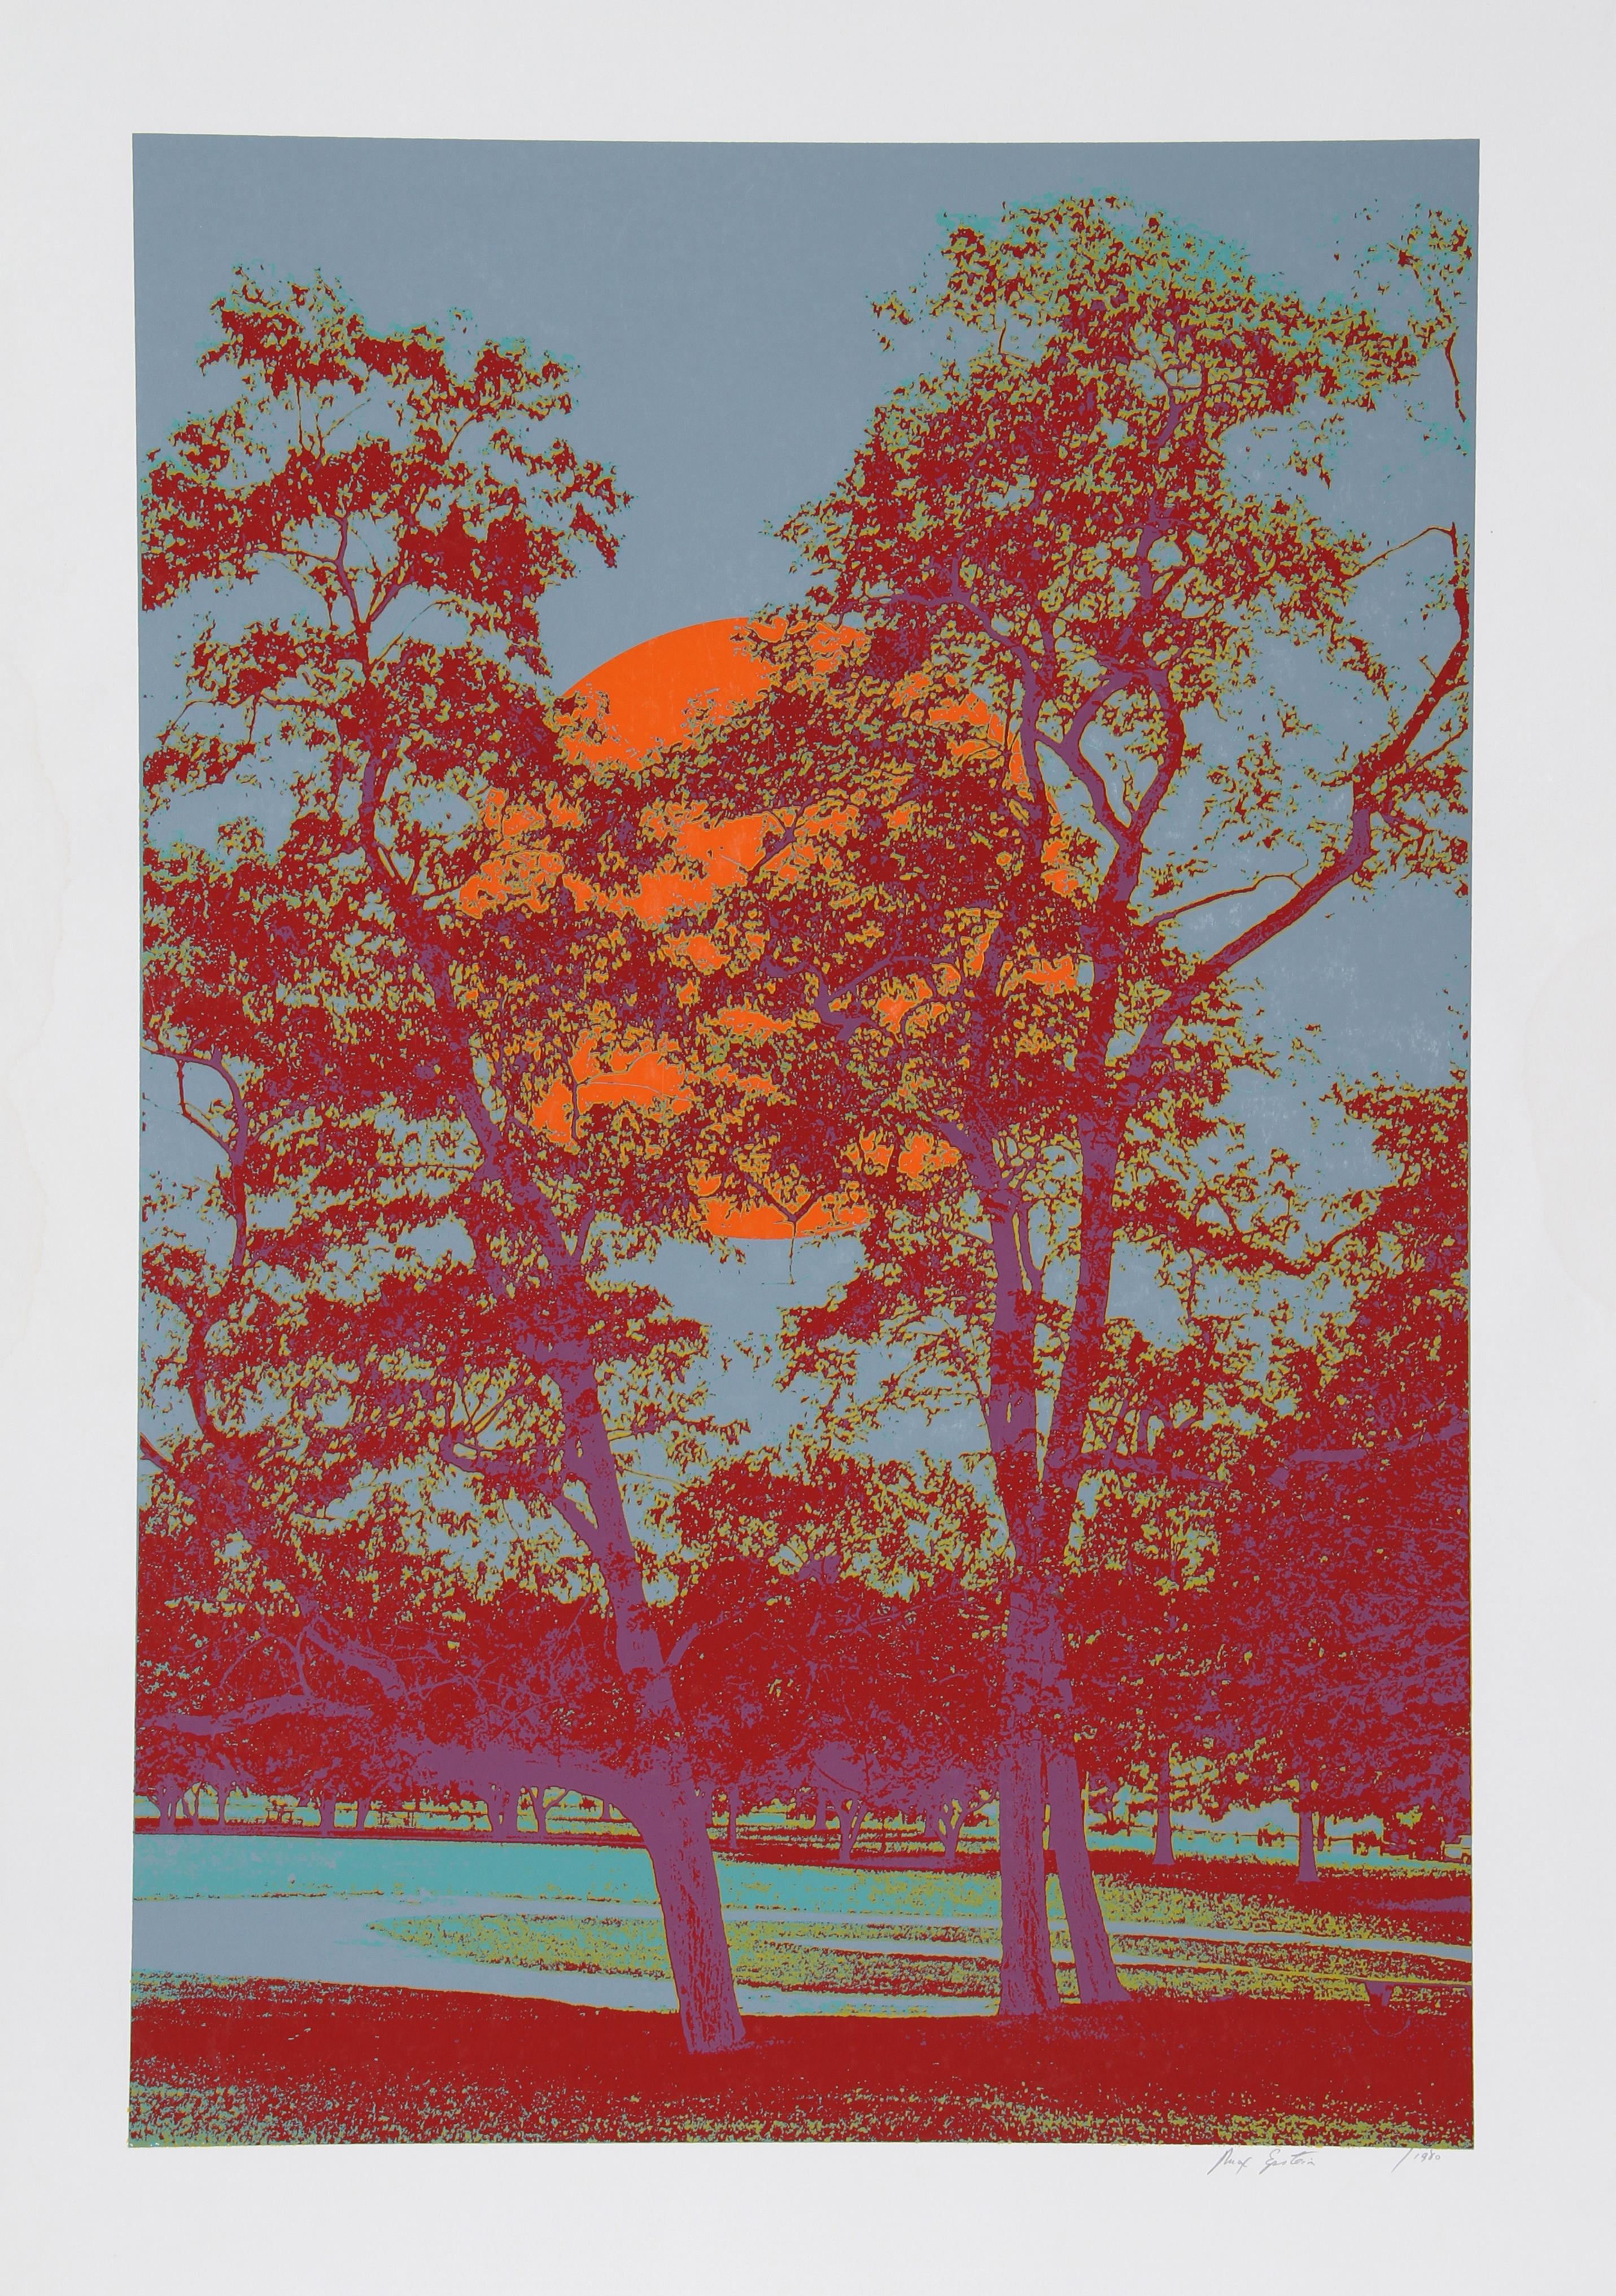 Growing Tall
Max Epstein, Canadian (1932–2002)
Date: 1980
Screenprint, signed and numbered in pencil
Edition of 295
Image Size: 28 x 18.5 inches
Size: 35 in. x 23 in. (88.9 cm x 58.42 cm)